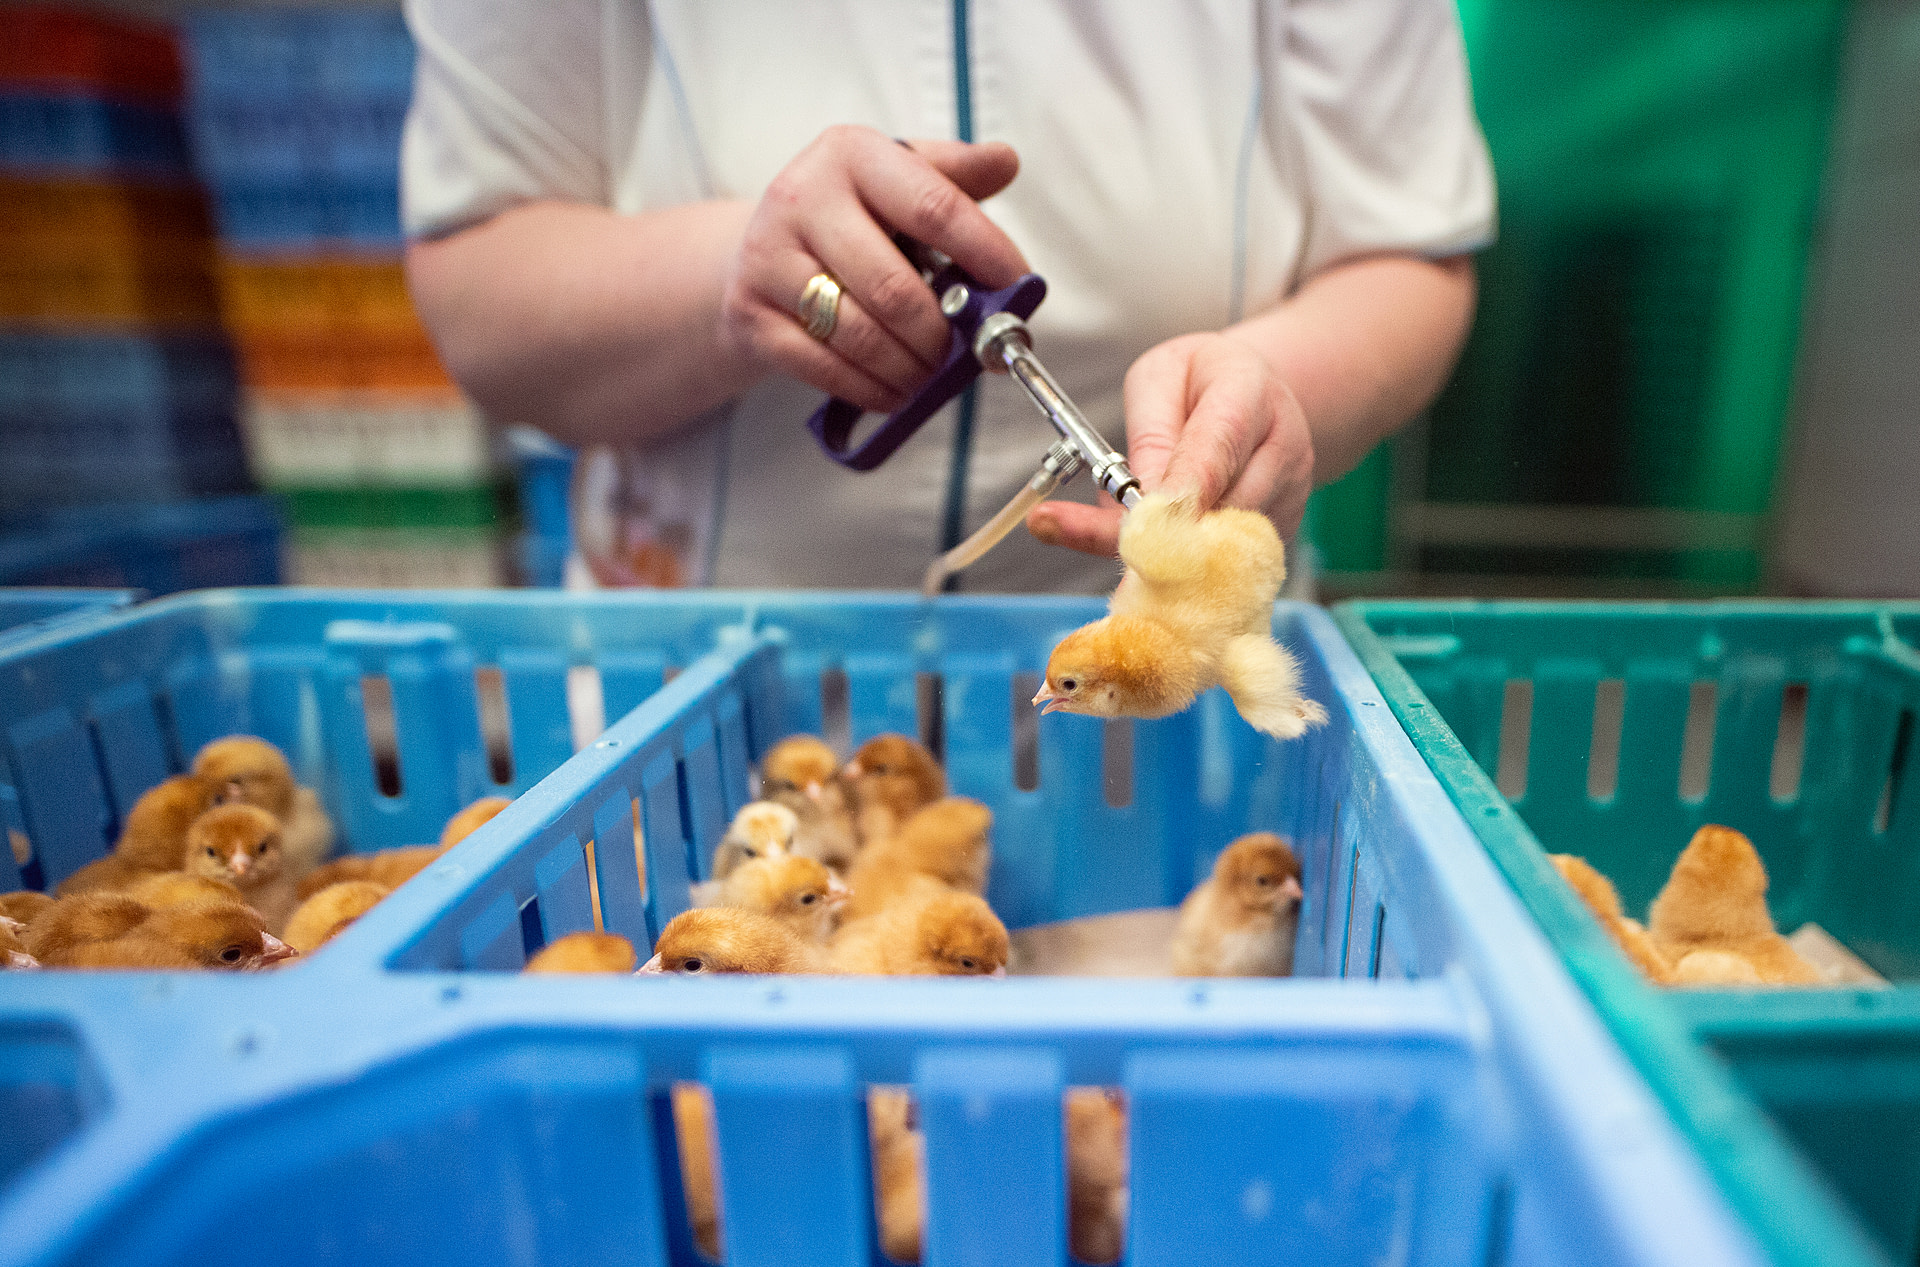 A day-old chick squirms as a worker administers a vaccine at a hatchery in Poland.